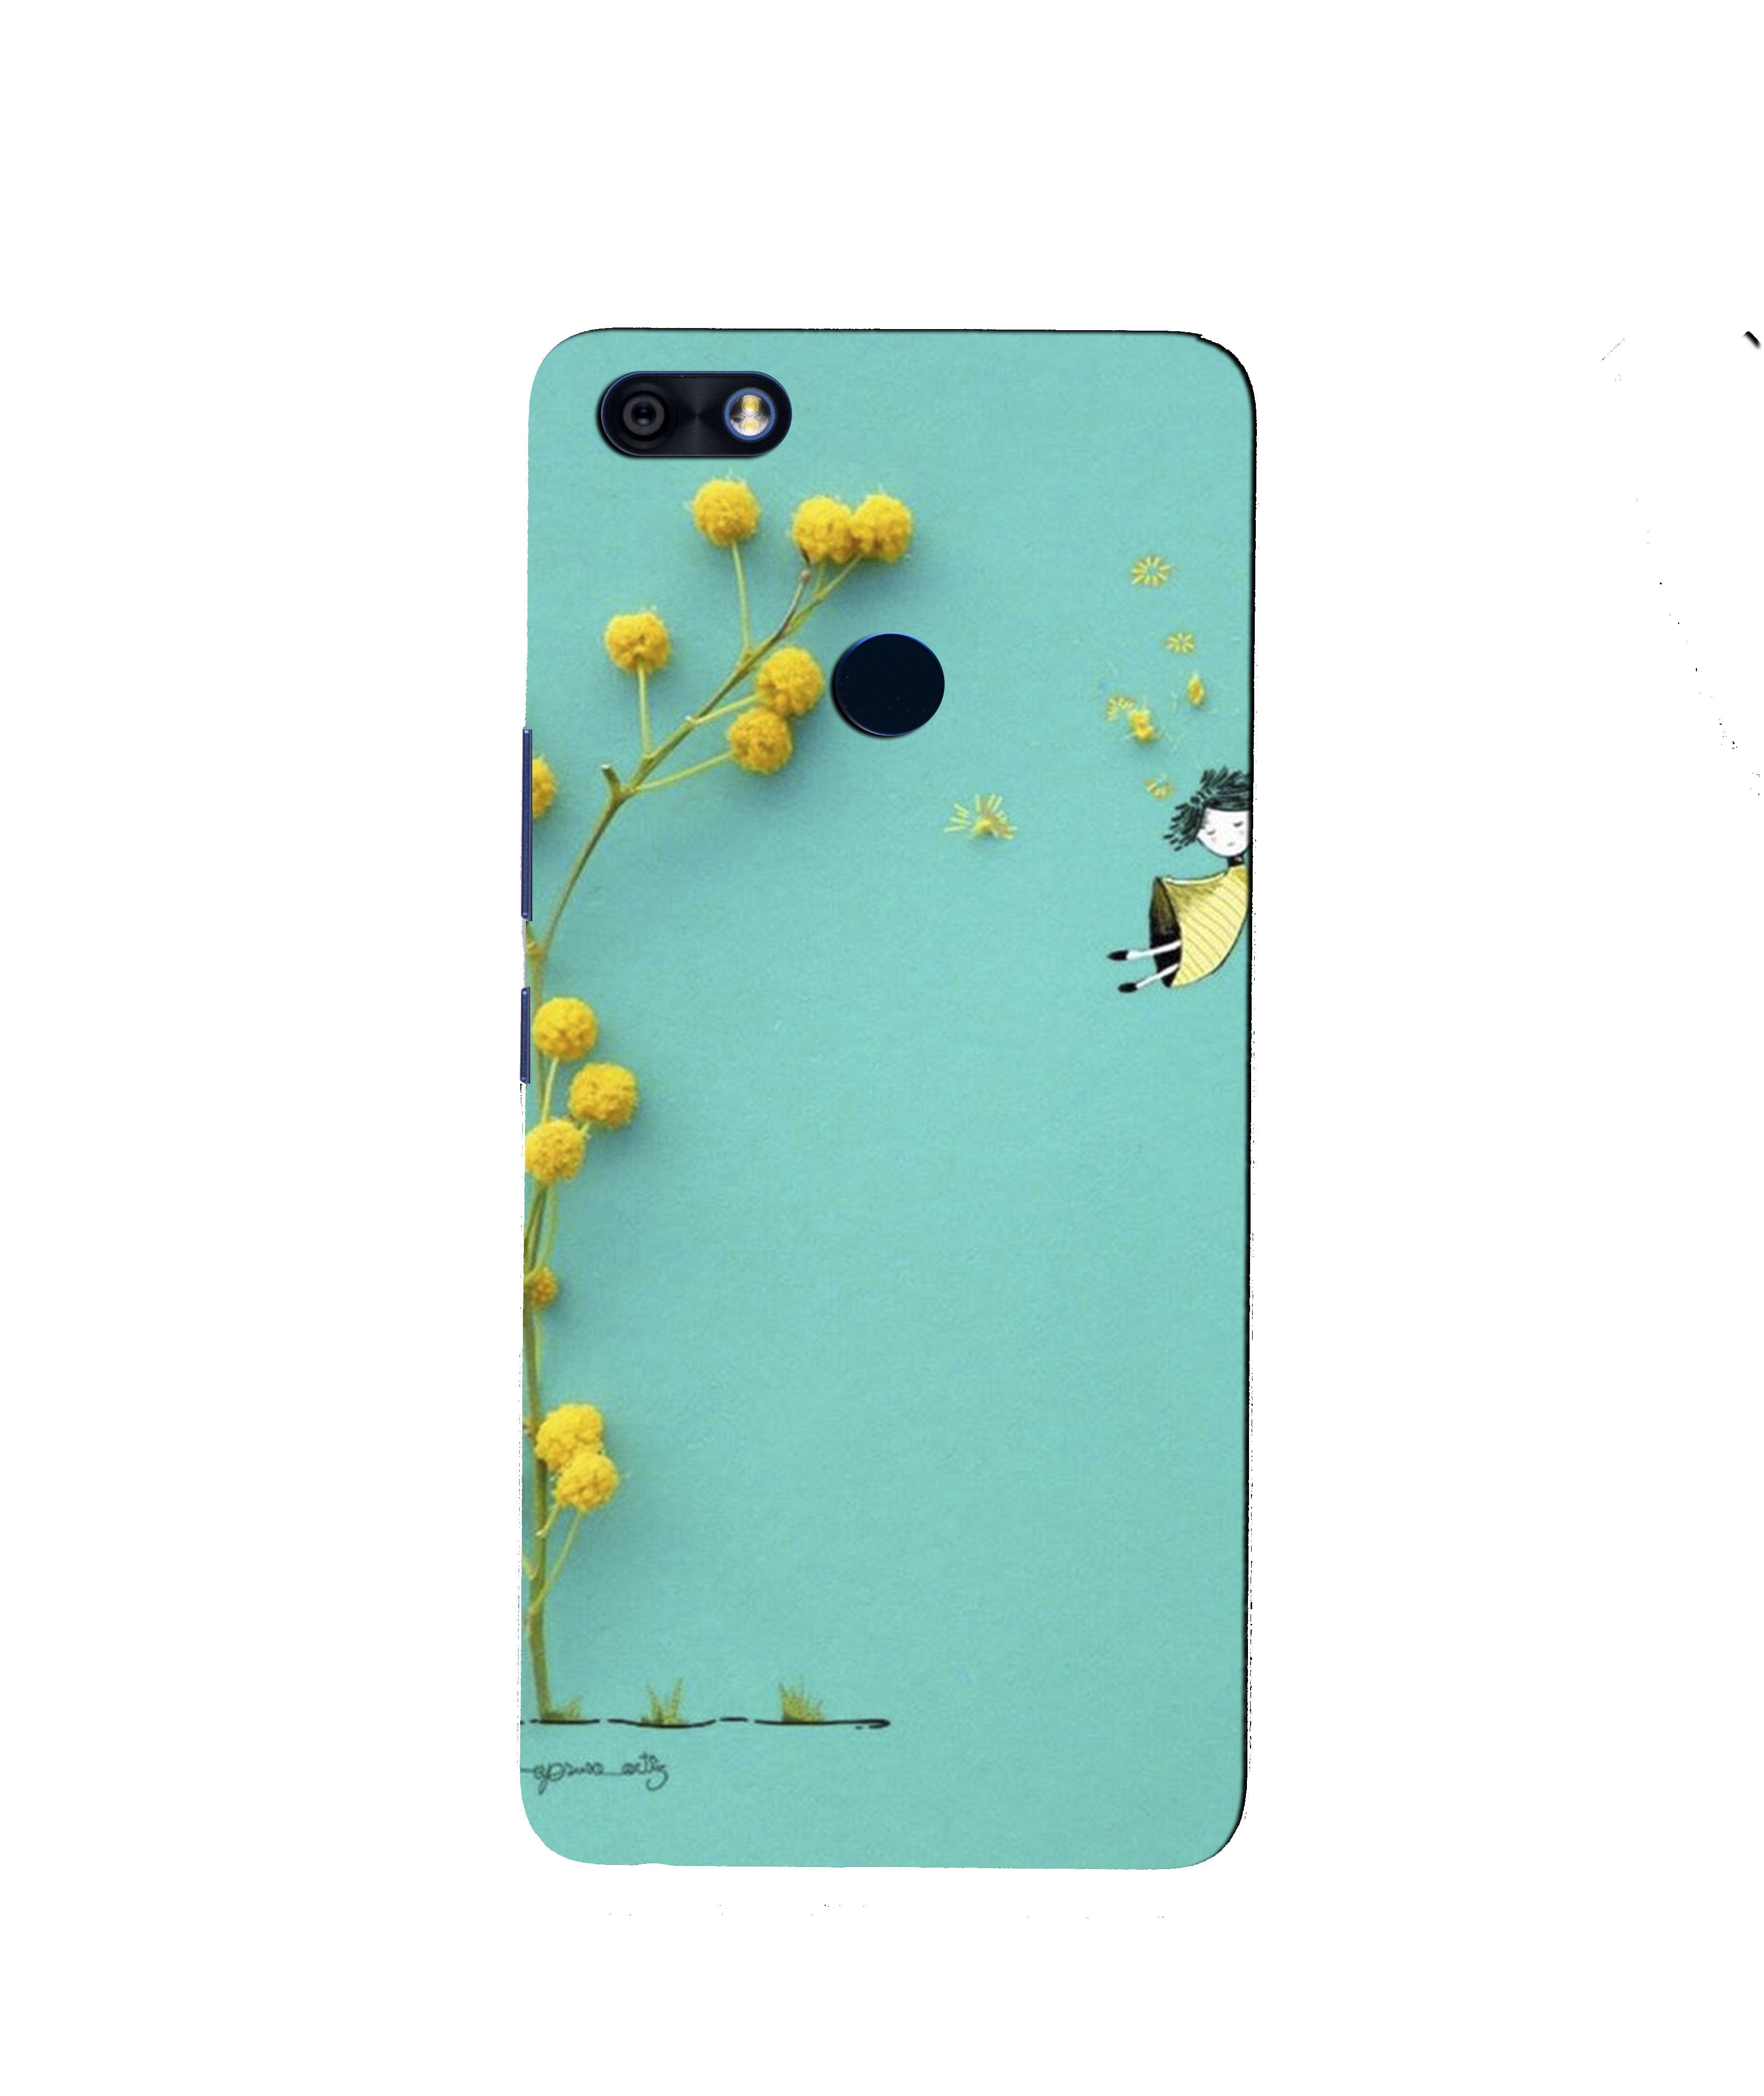 Flowers Girl Case for Infinix Note 5 / Note 5 Pro (Design No. 216)